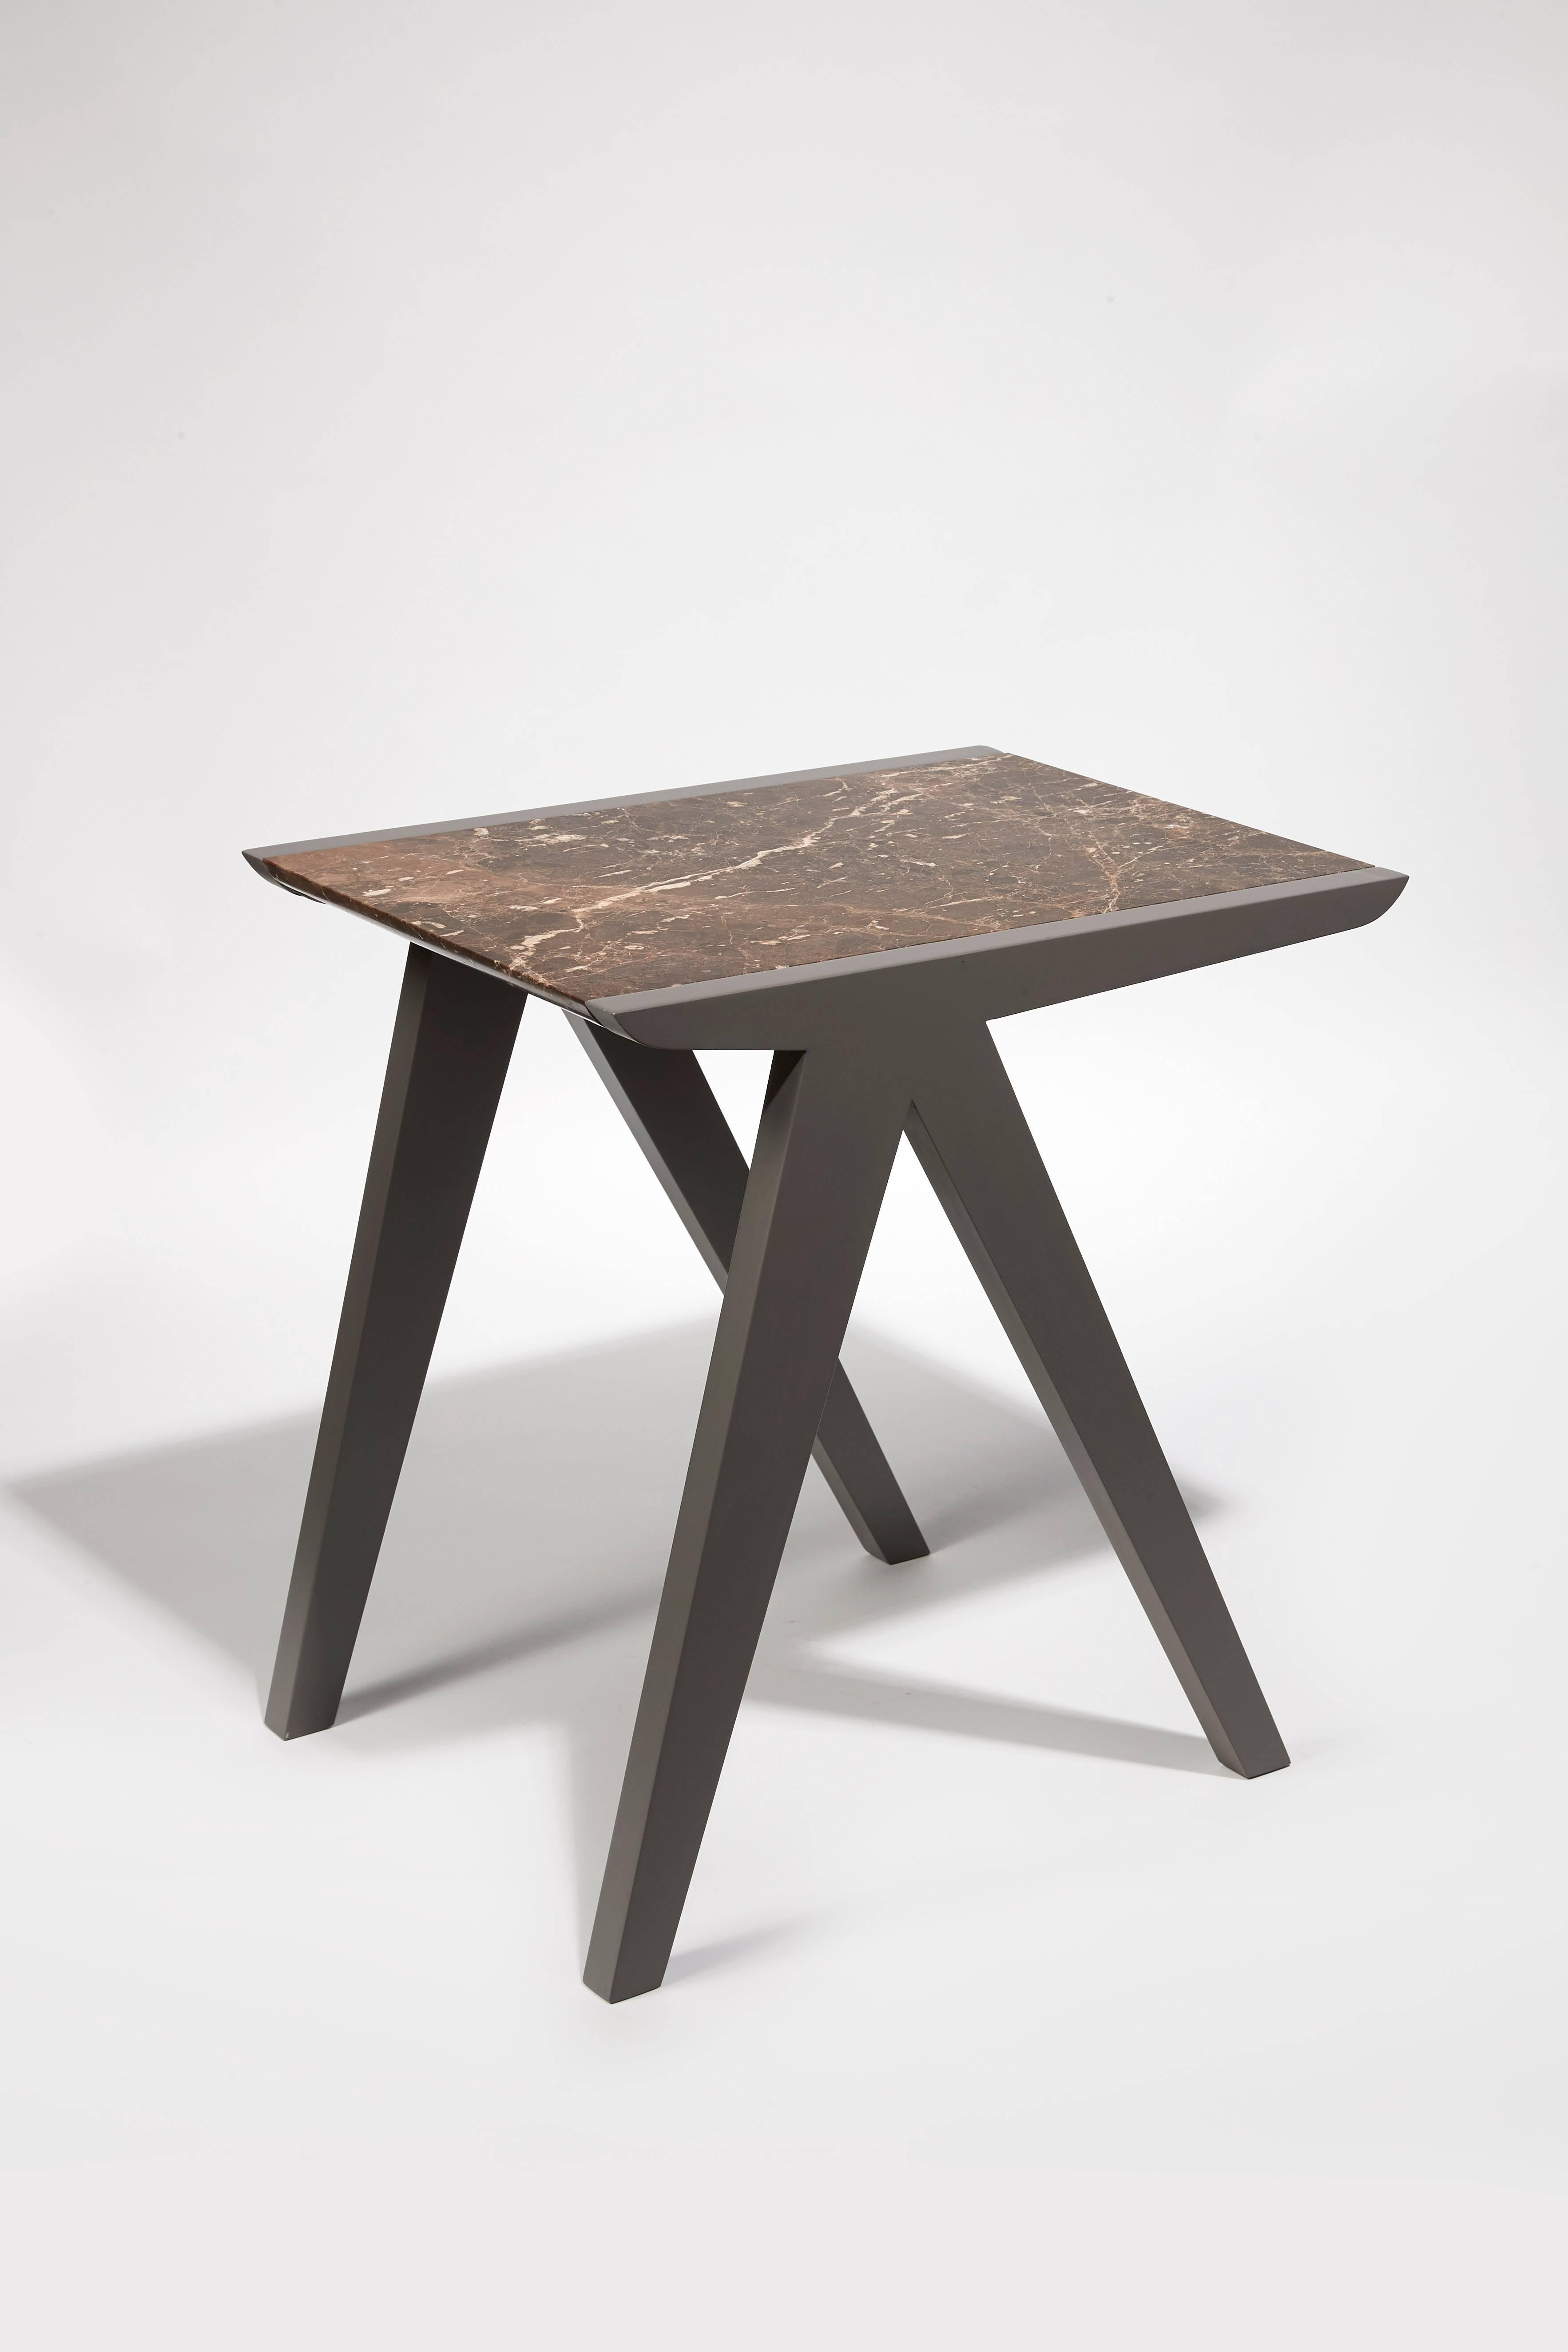 Beechwood, grey lacquer, black marble. Available in several colors.
Measures: 21.5 x 16 x 21 in.